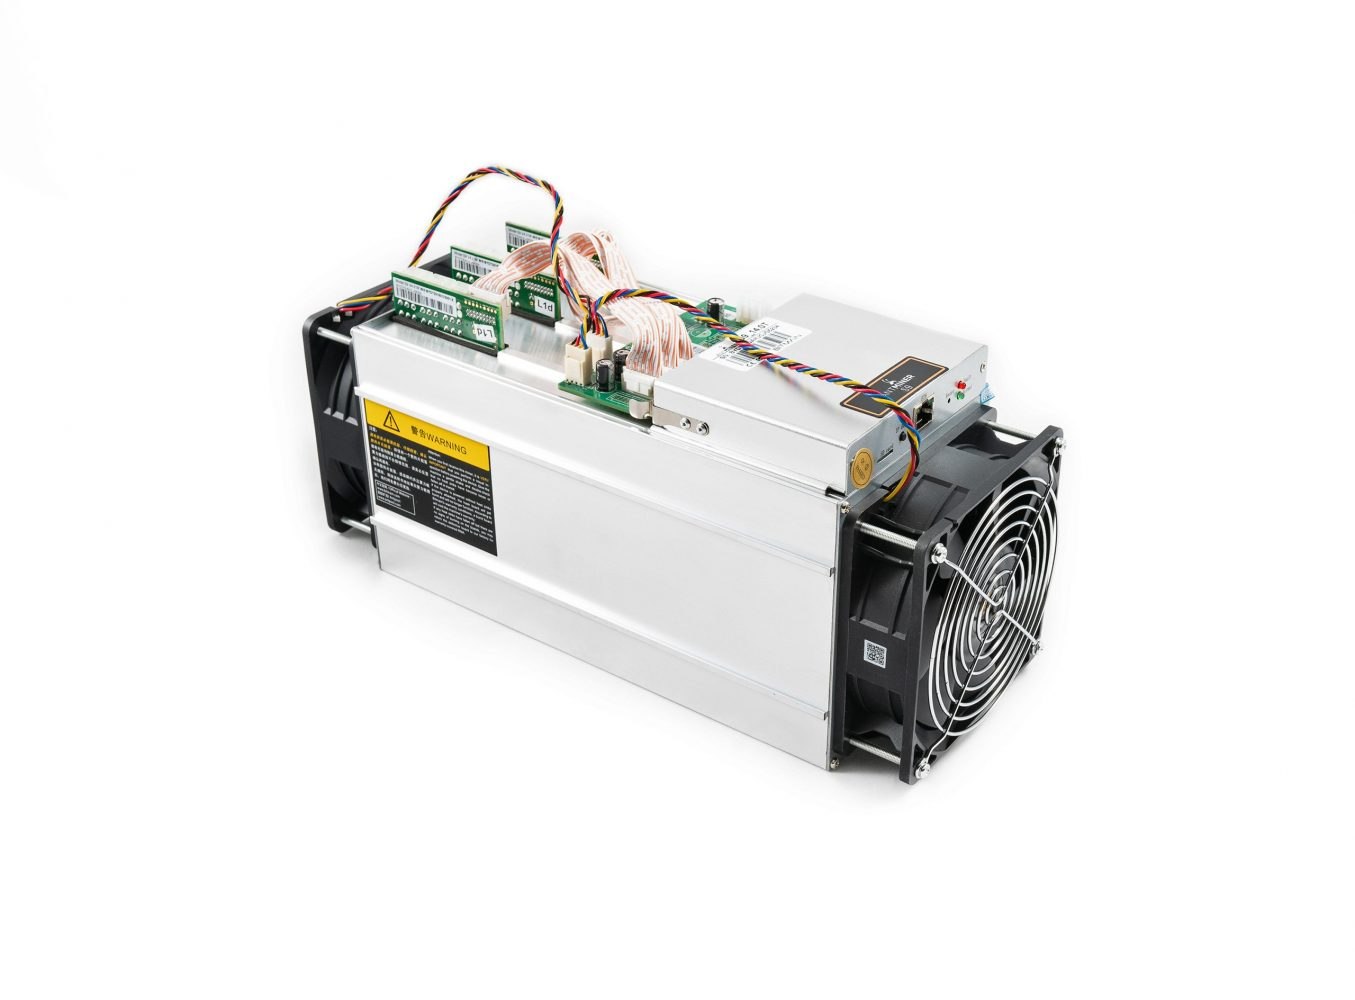 Th/s Contract for BTC/BCH & any SHA256 coin. 25 hrs Antminer S9i 14